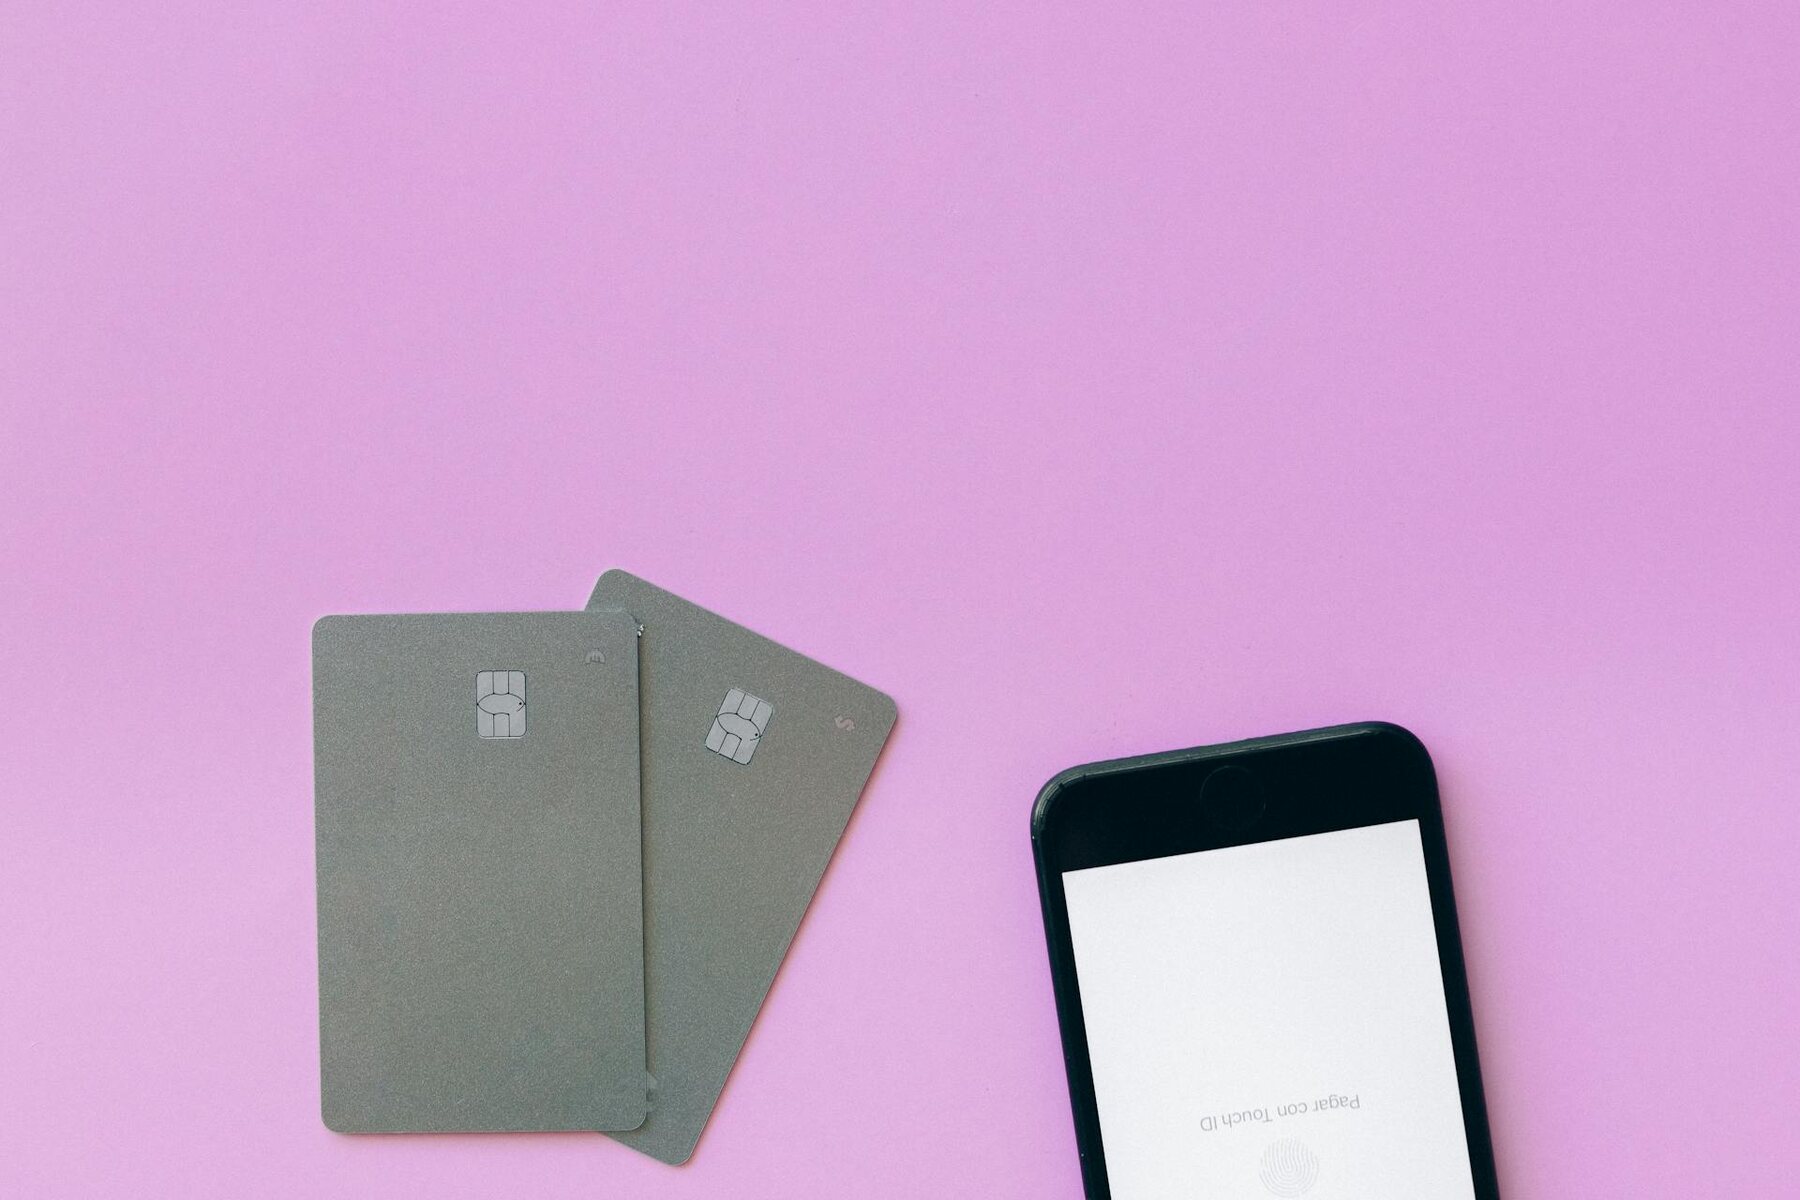 A smartphone and credit cards on a pink background